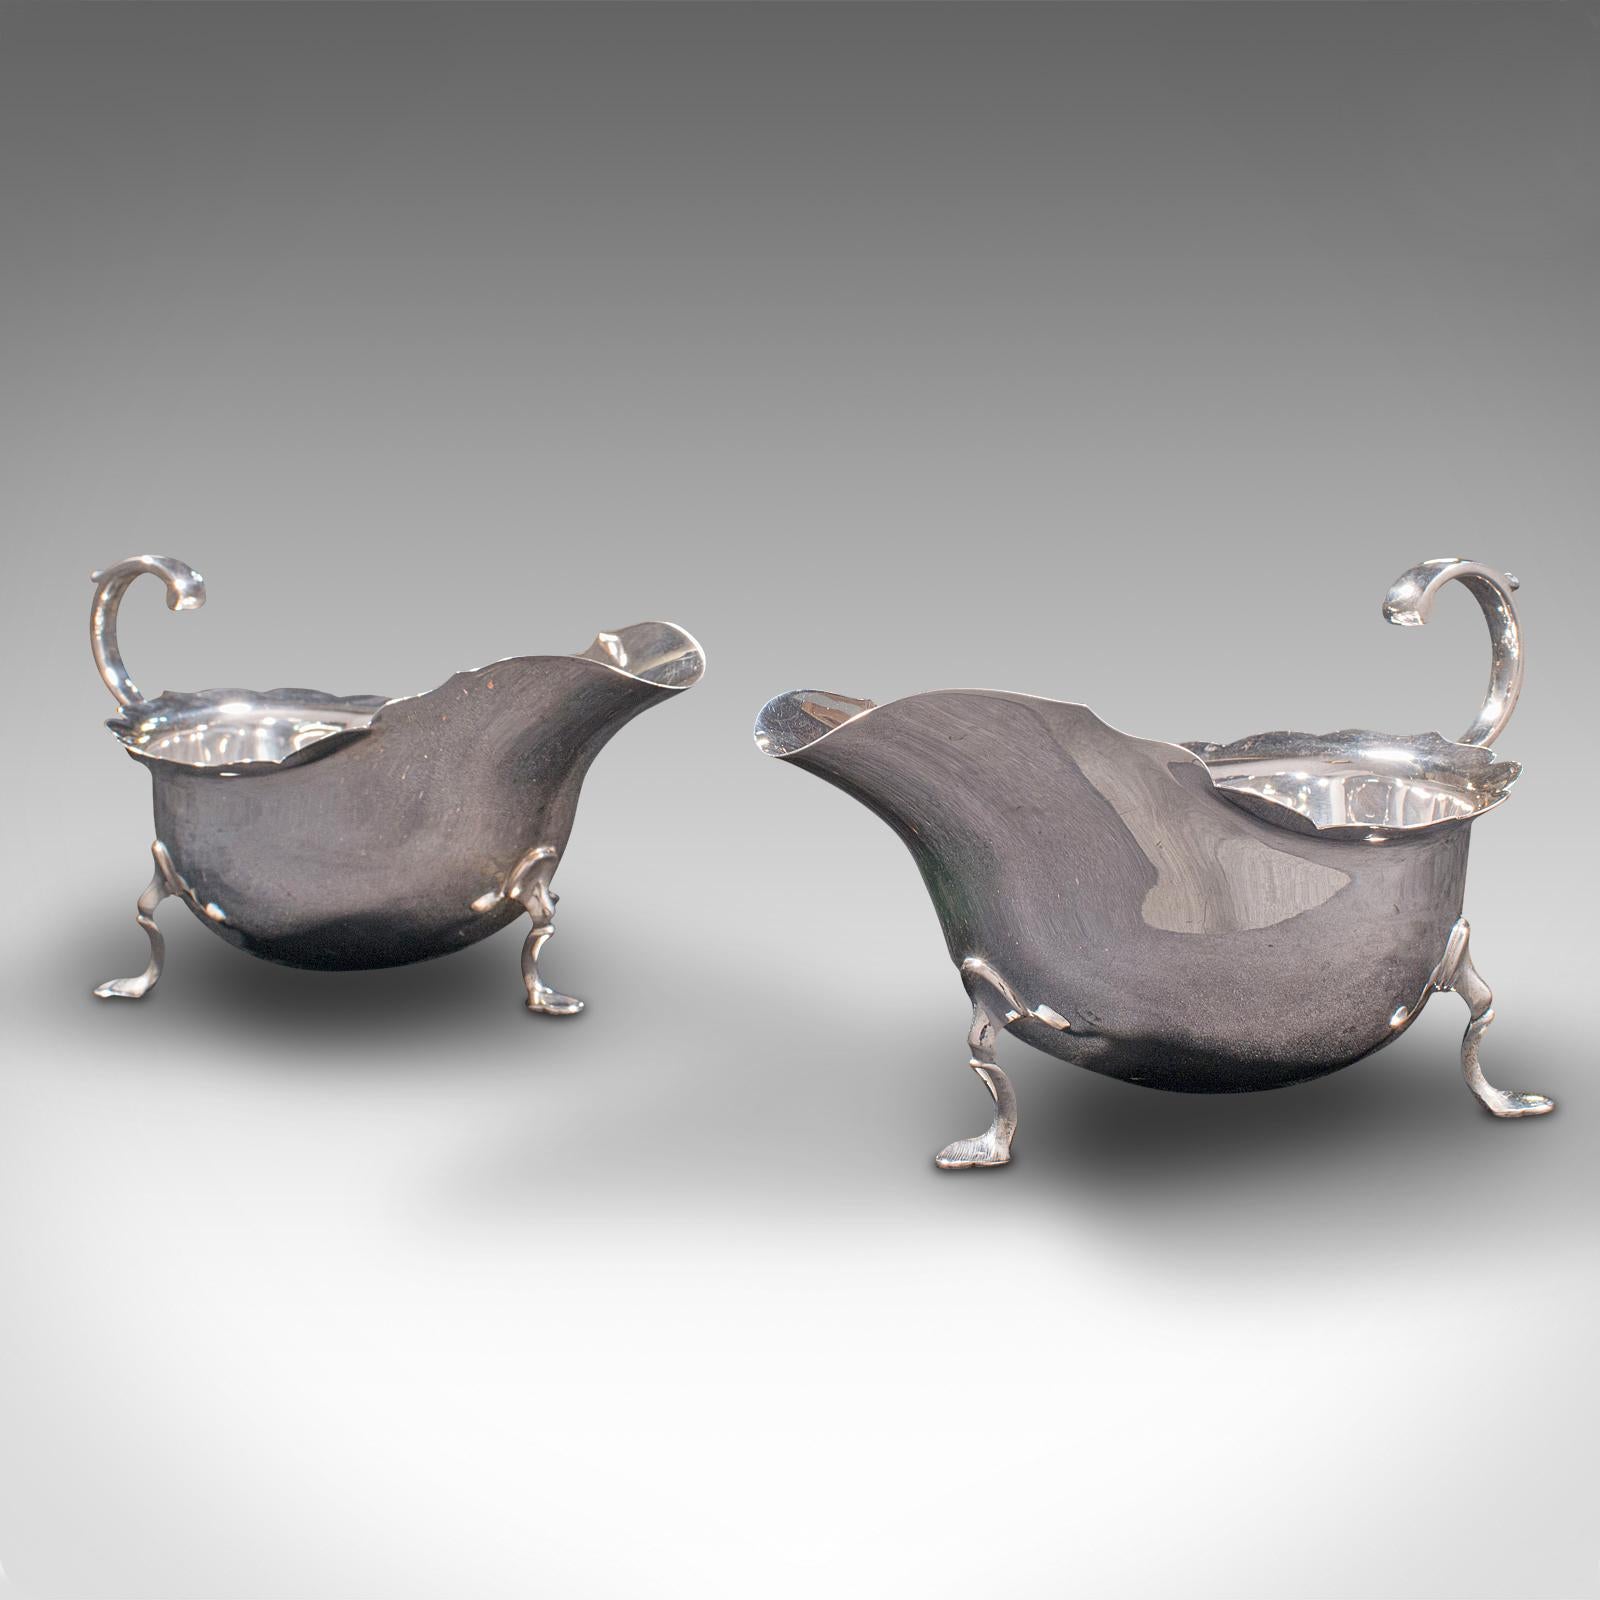 This is a pair of antique sauce boats. A British, silver condiment dish with serving spoons, hallmarked during the Edwardian period, 1909.

Delightfully presented, ready for the dining table
Displays a desirable aged patina throughout
Quality